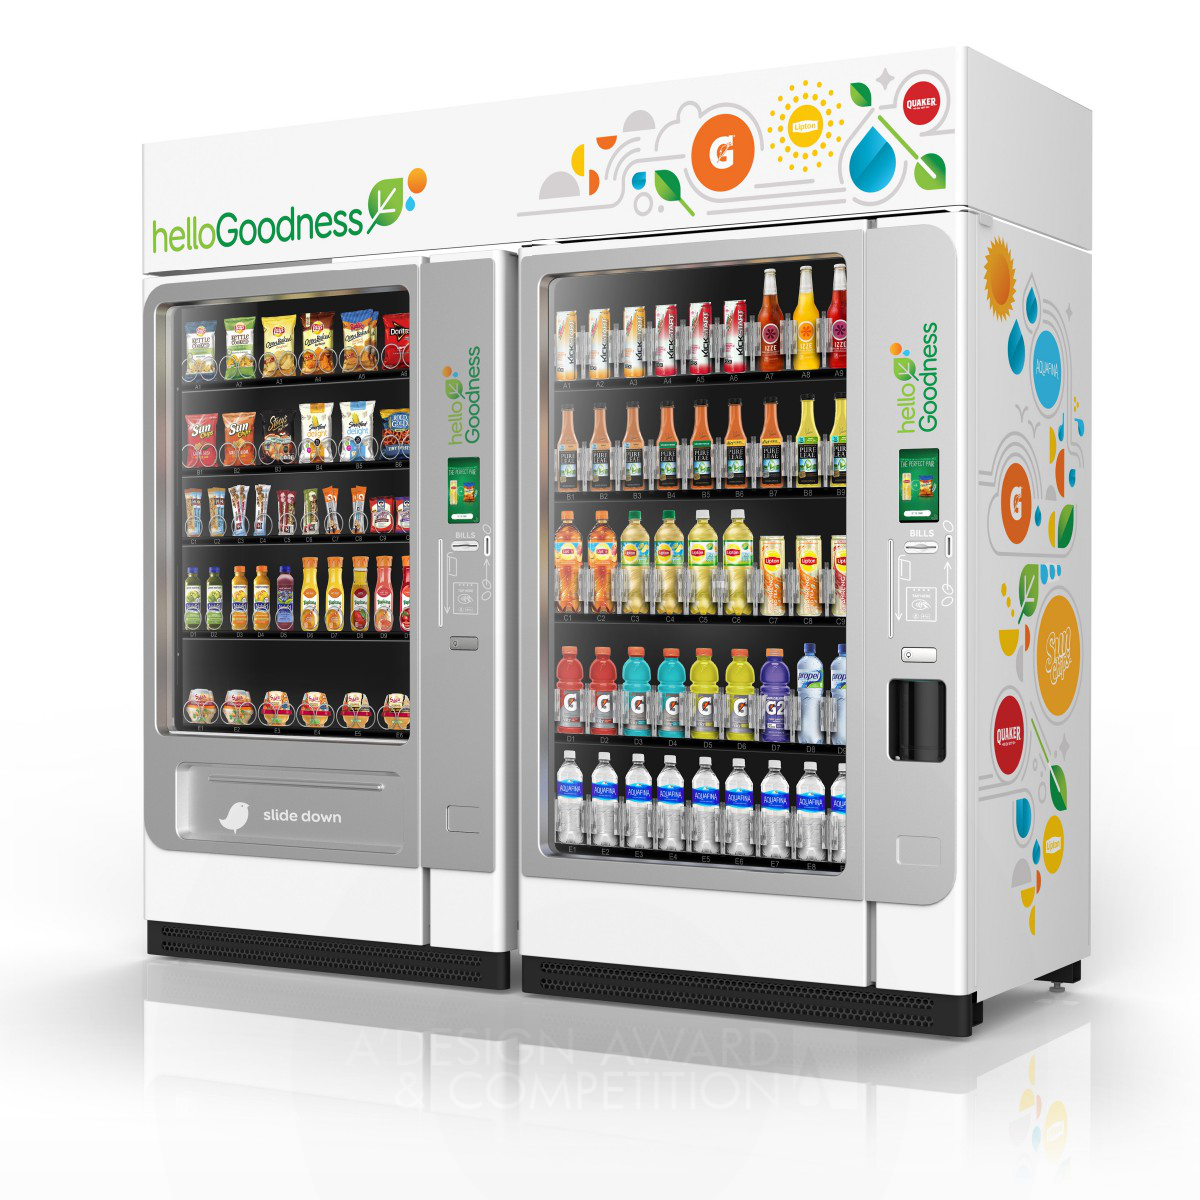 Hello Goodness Vending Machine by PepsiCo Design and Innovation Silver Food, Beverage and Culinary Arts Design Award Winner 2017 